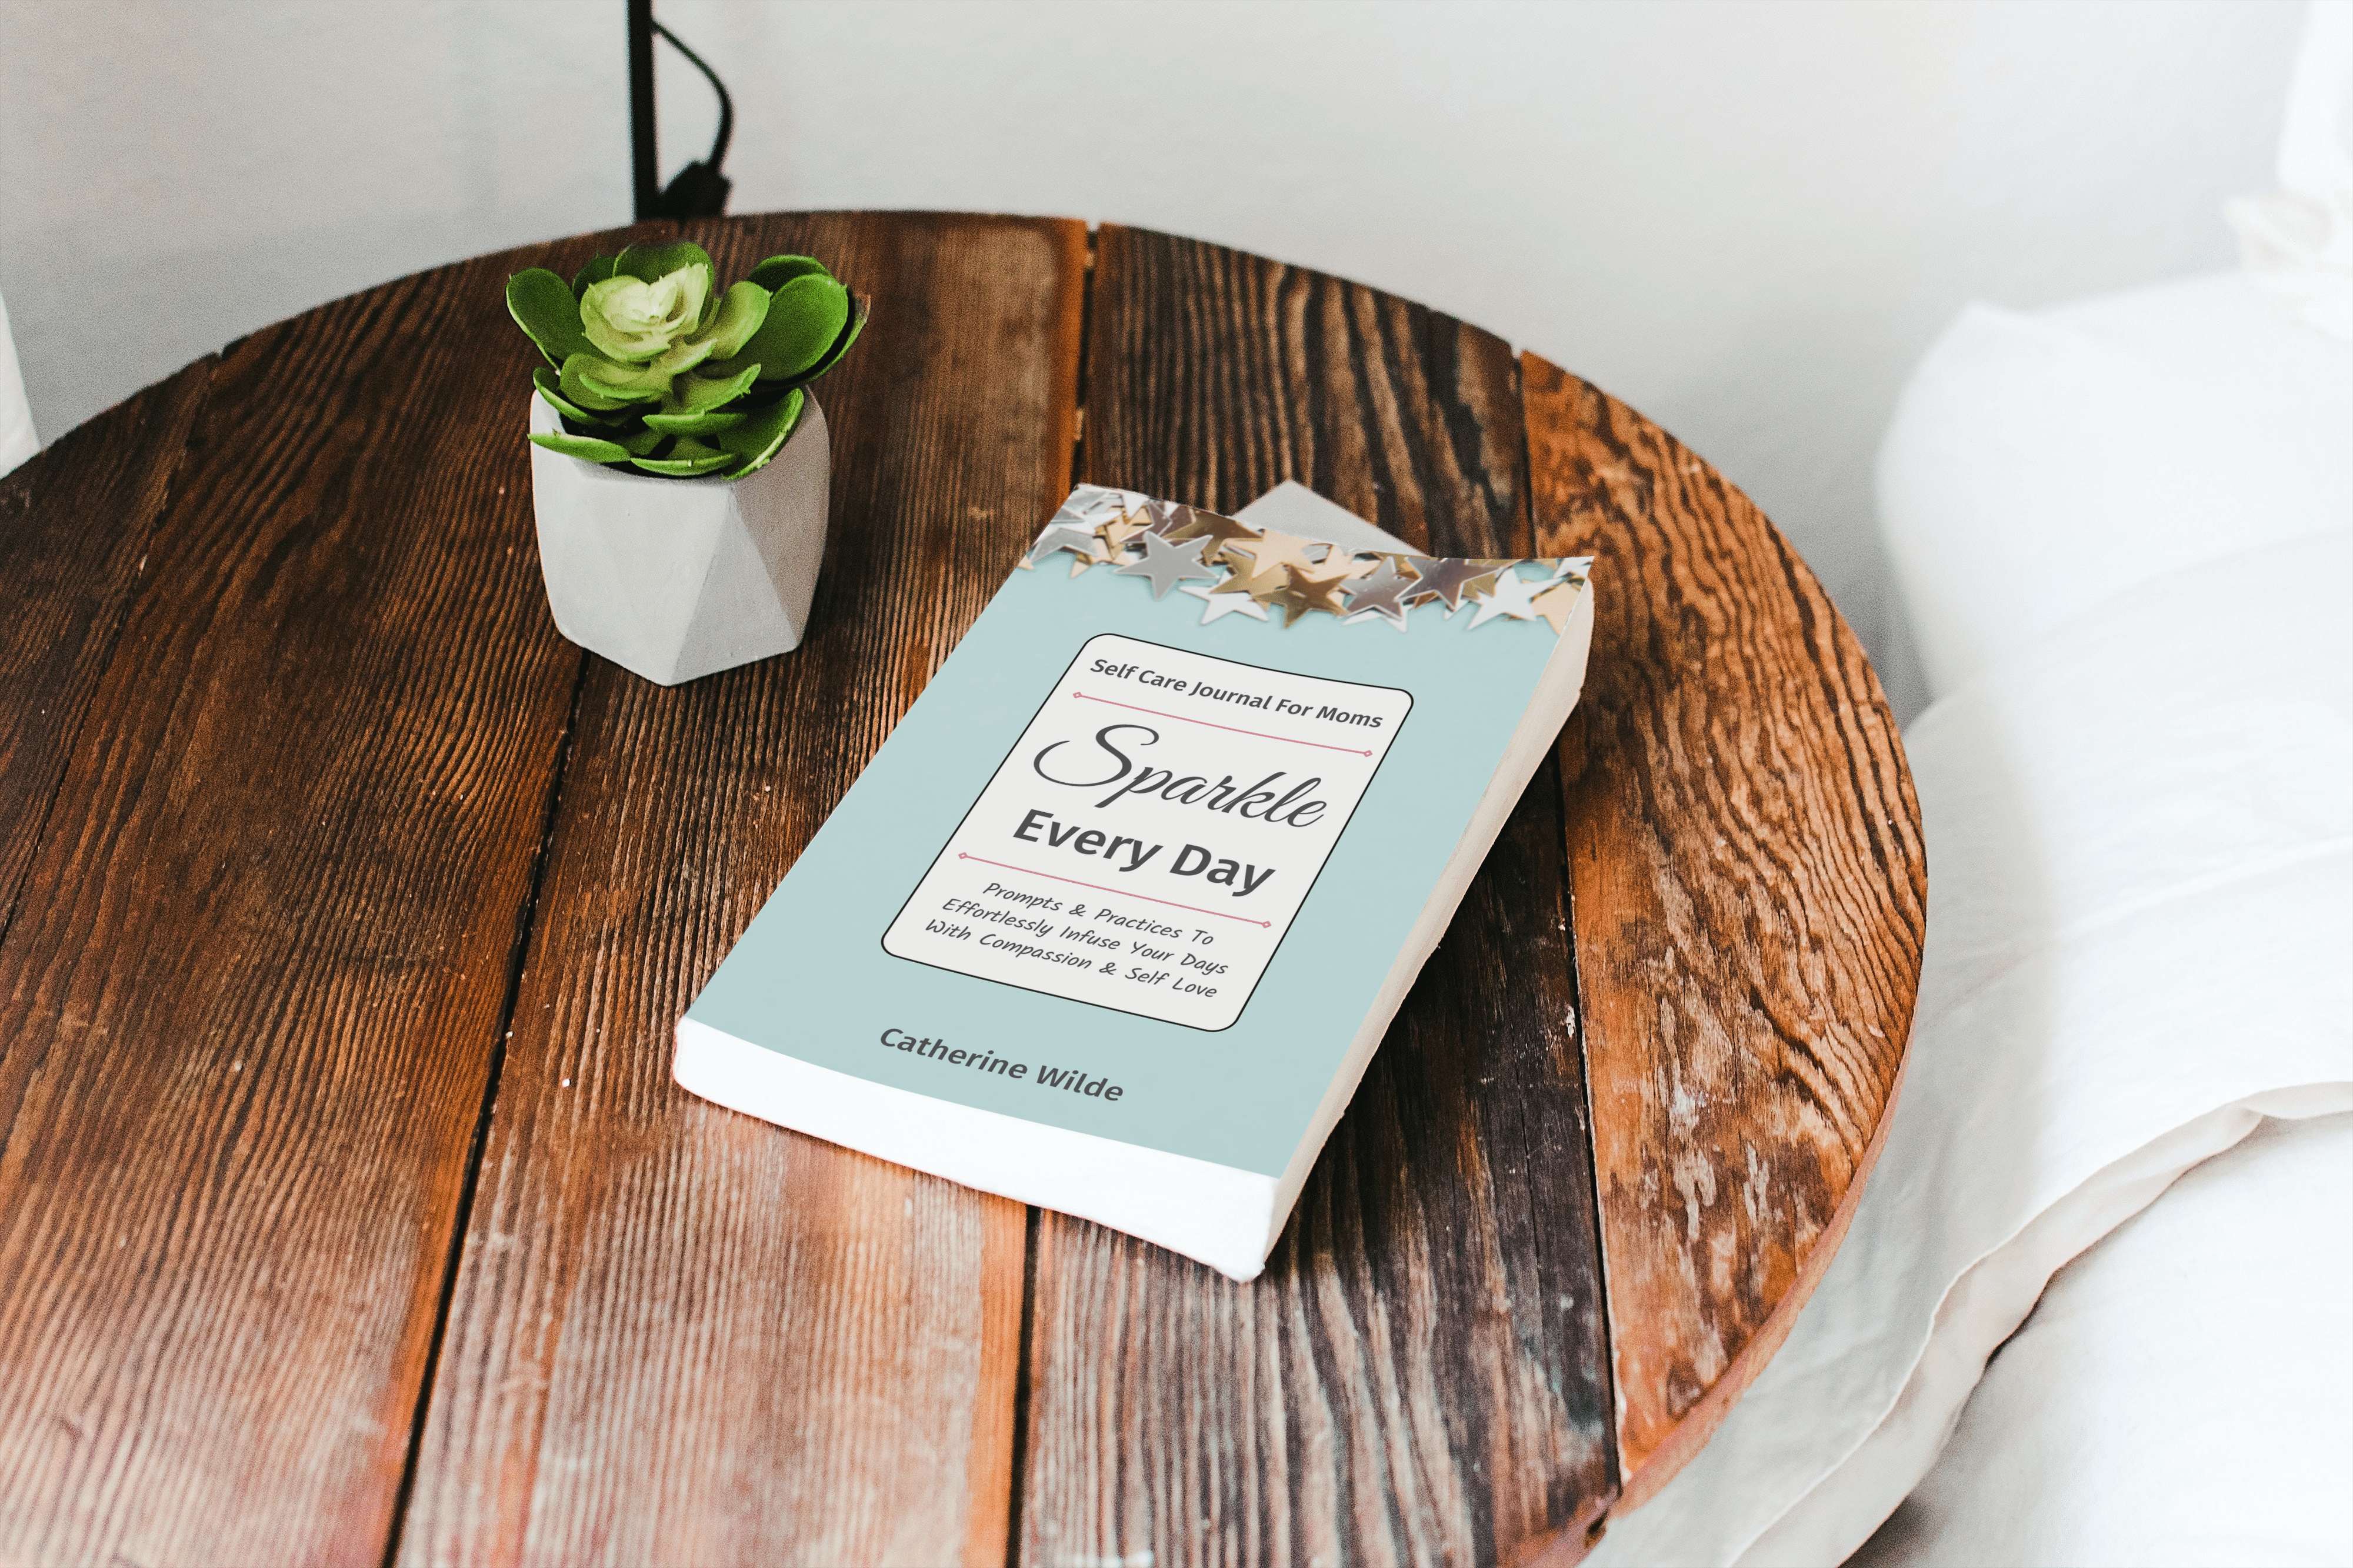 Sparkle Every Day - Self Care Journal For Moms on a wooden table